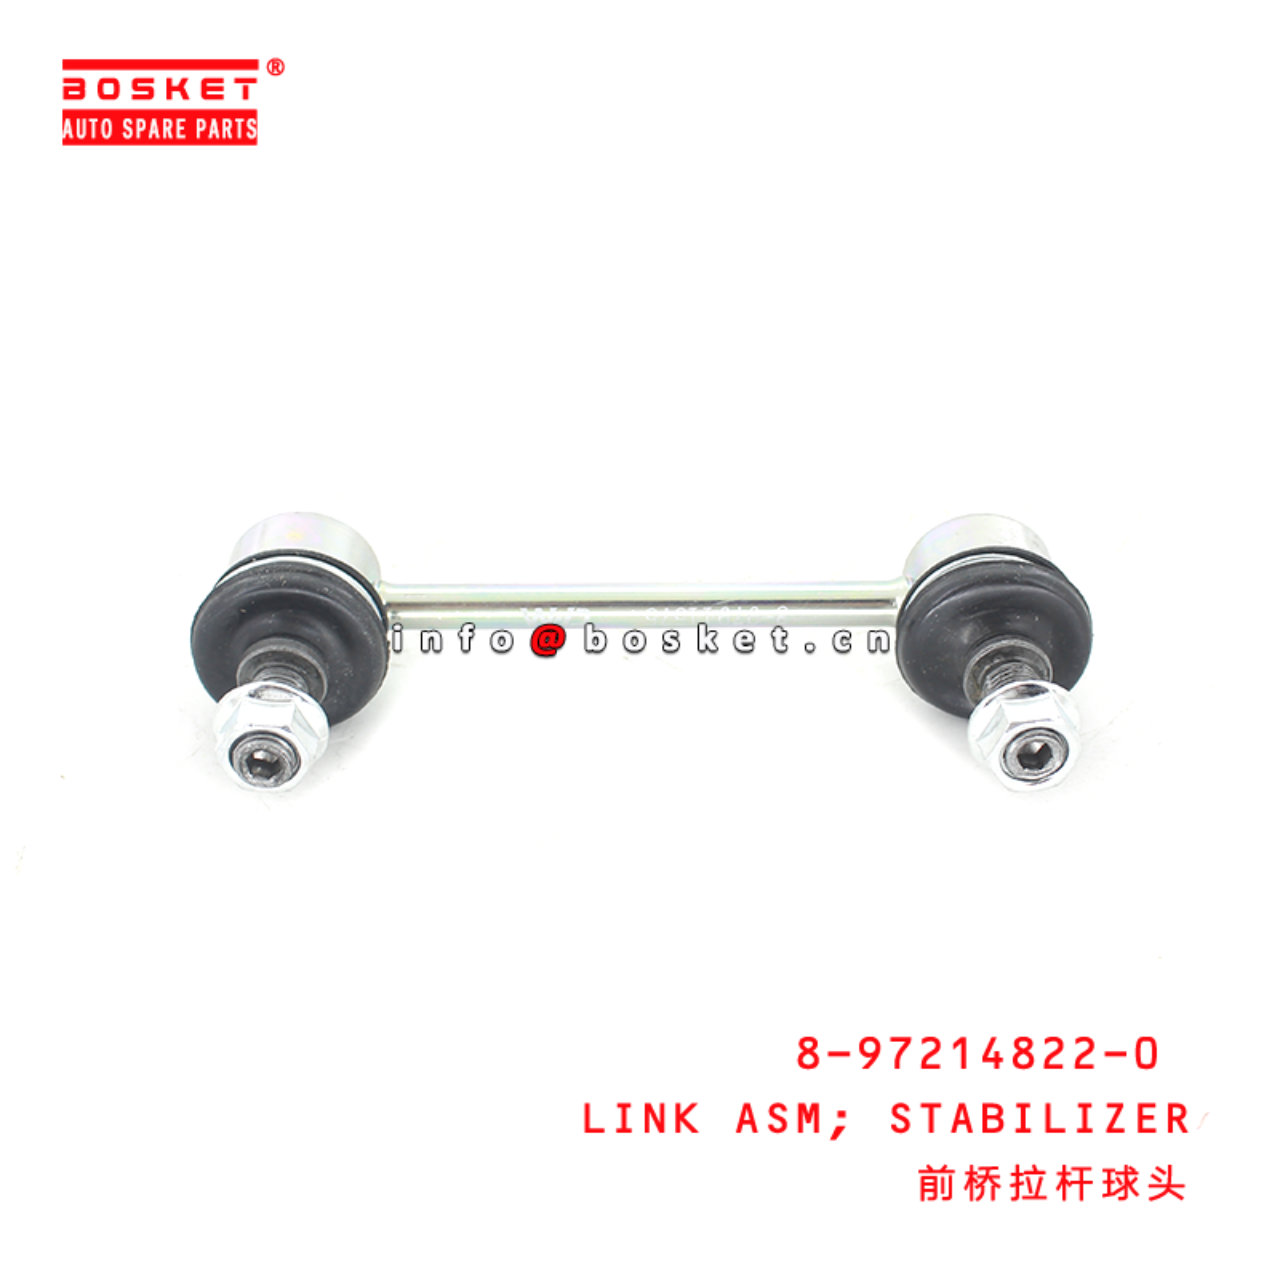 8-97214822-0 Stabilizer Link Assembly Suitable for ISUZU DMAX 4X2 8972148220